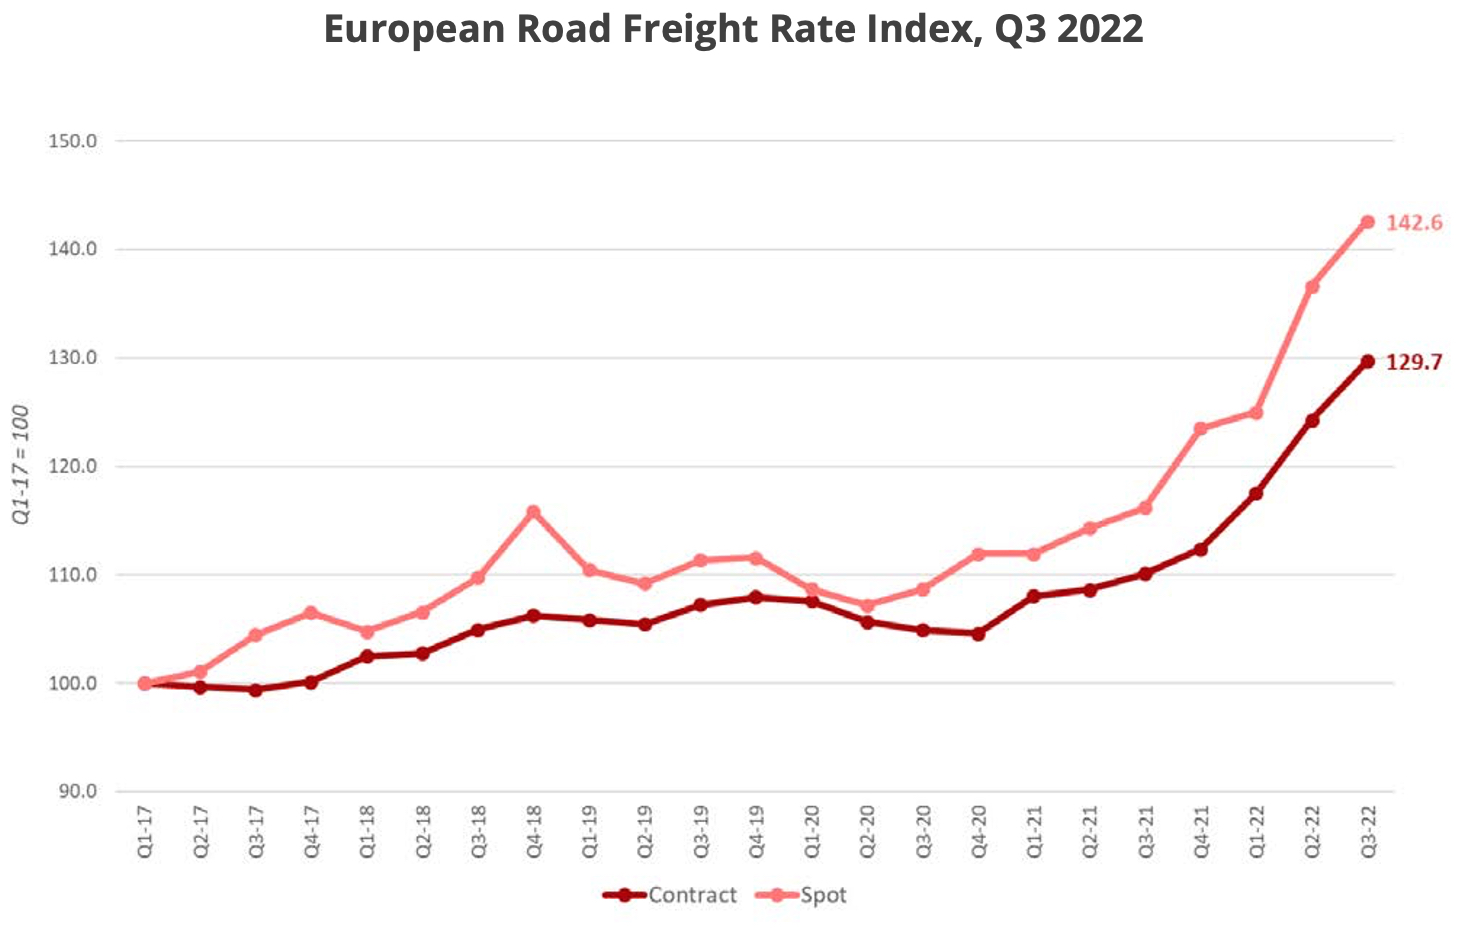 europe_road_freight_index_t3_2022